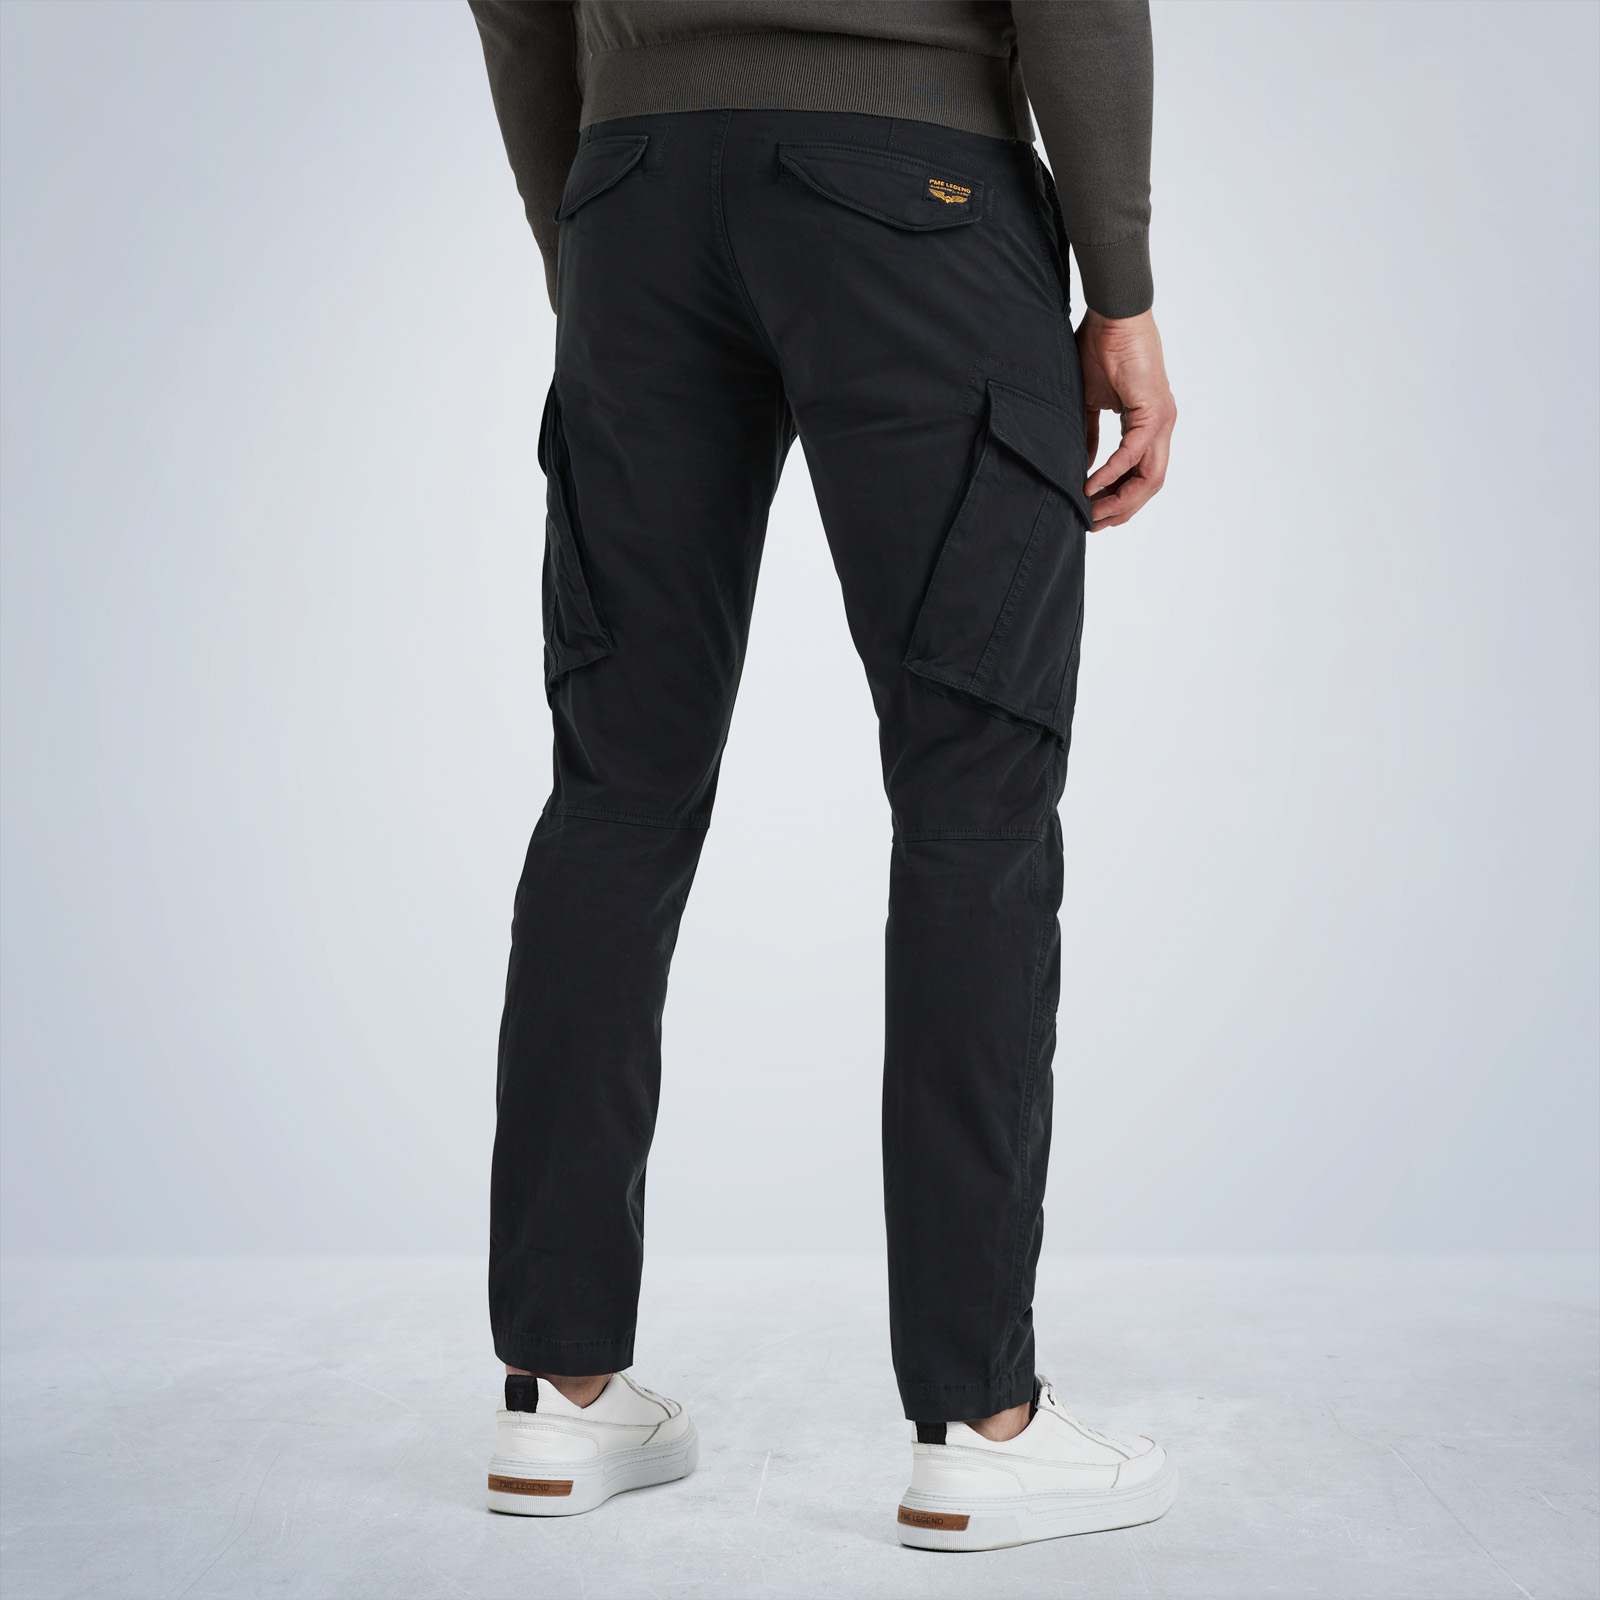 pants and | Nordrop shipping LEGEND tapered PME cargo returns | fit Free